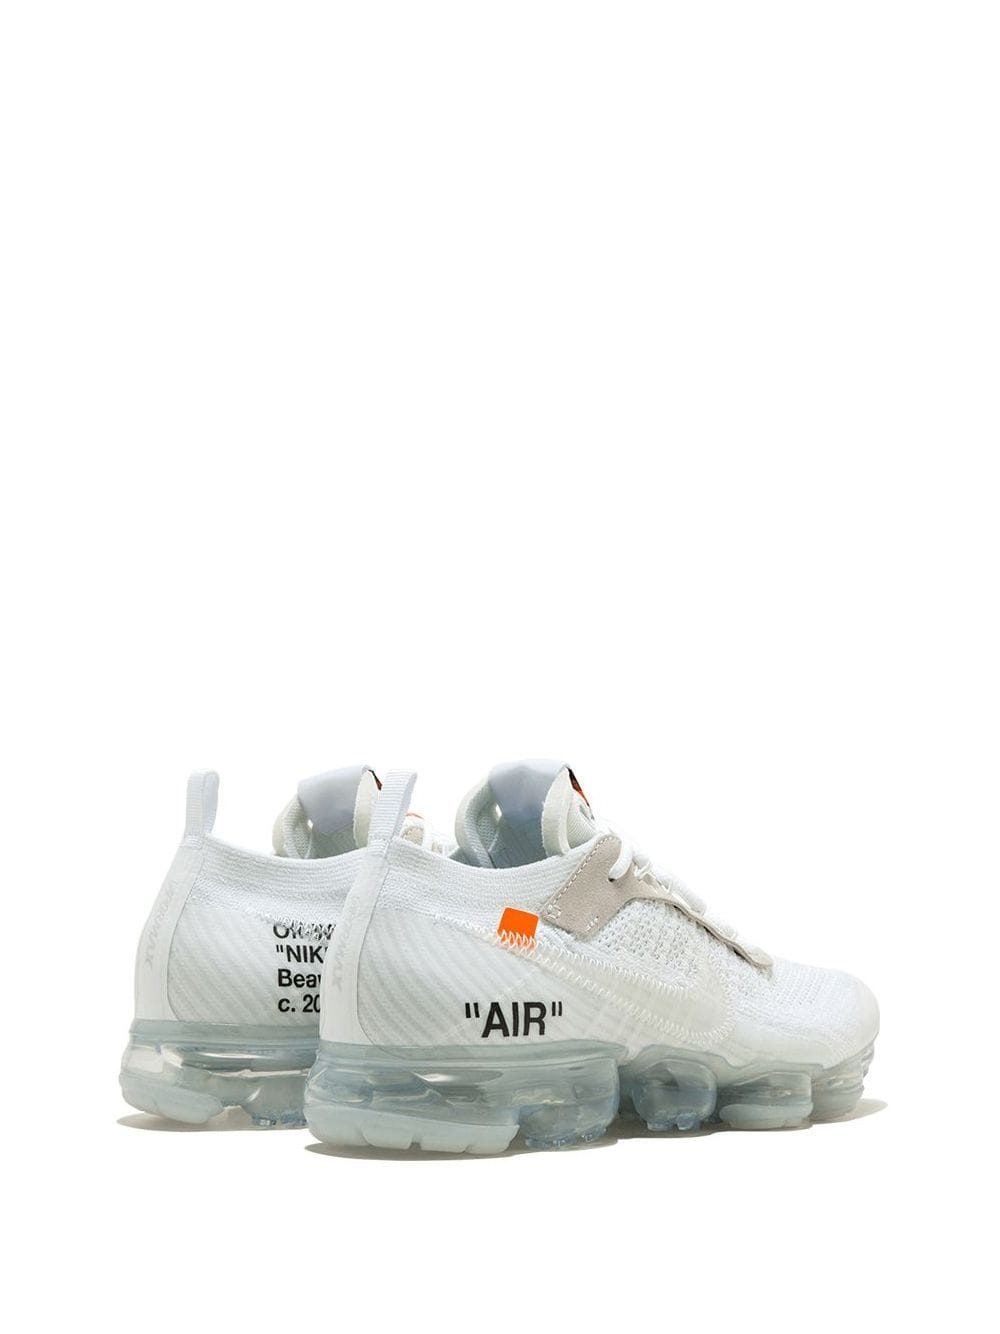 Nike X Off-White The 10 Air Vapormax Flyknit sneakers